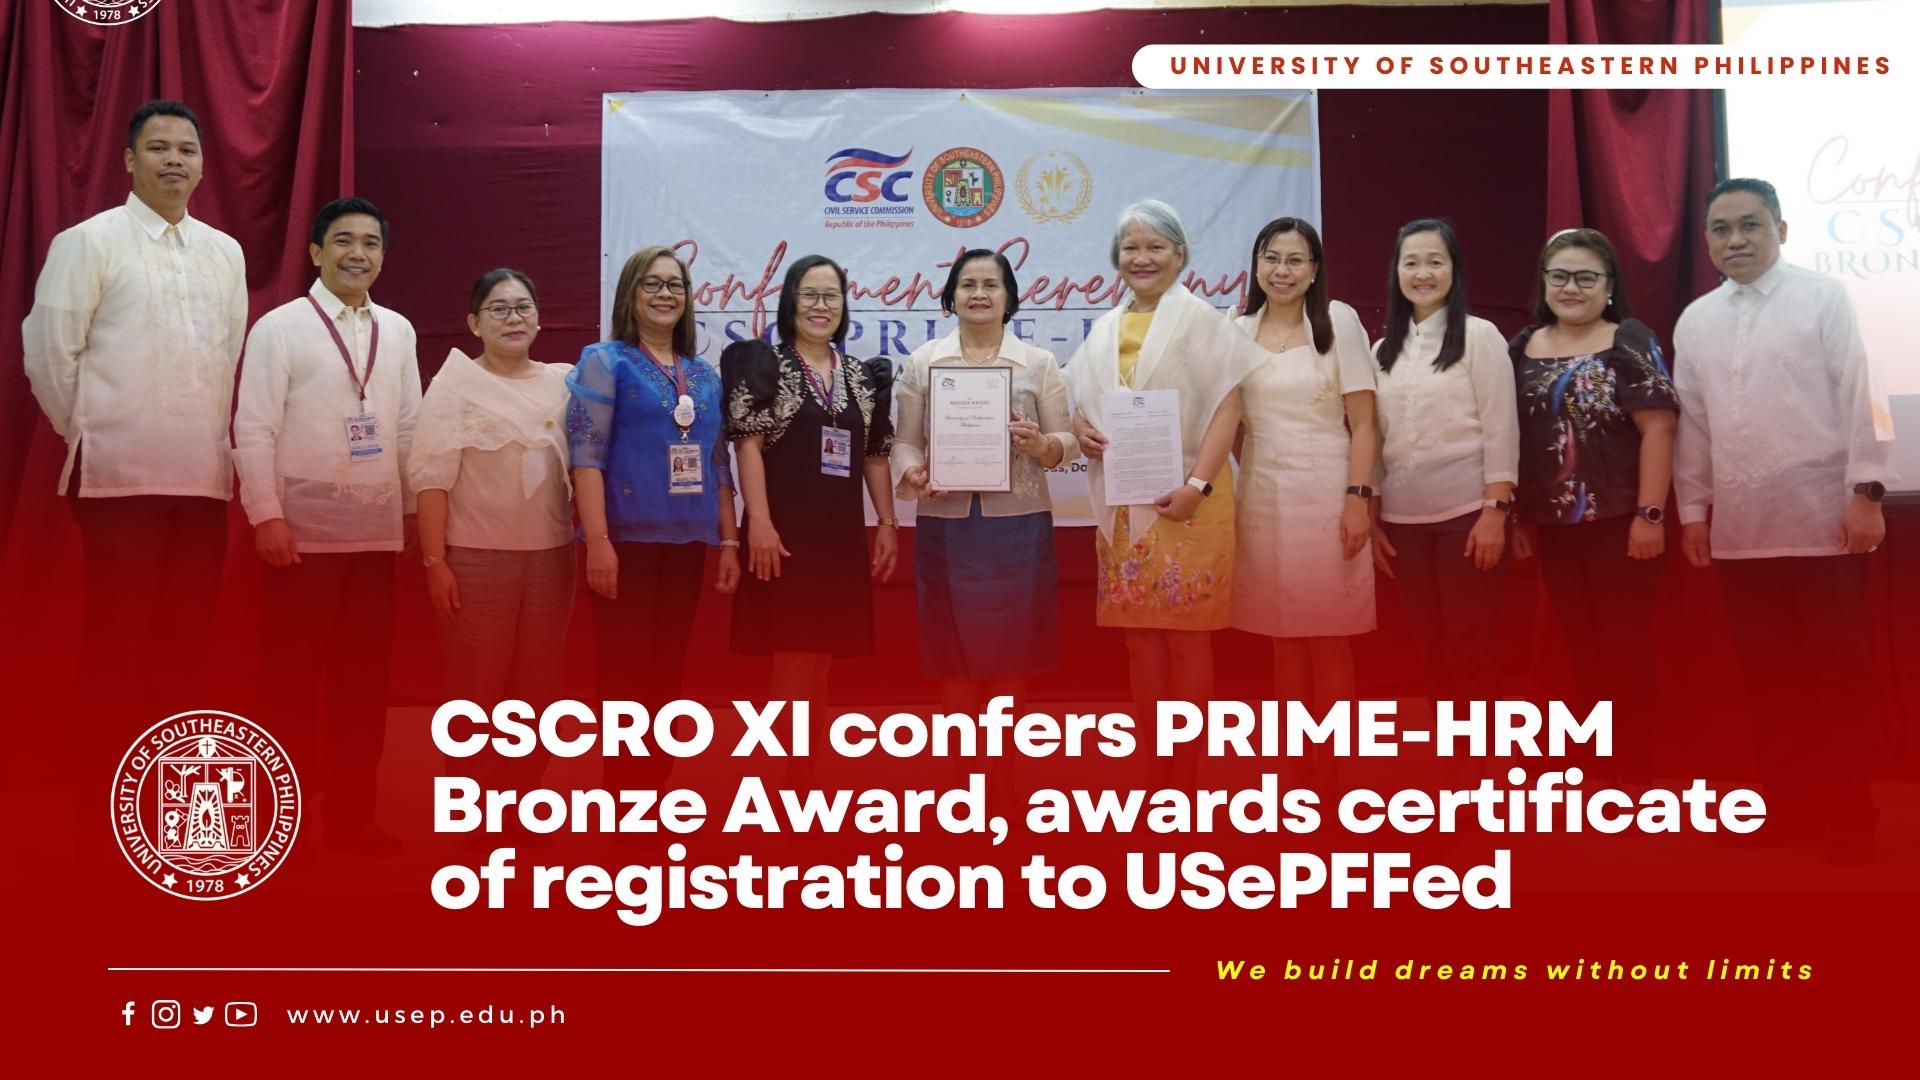 CSCRO XI confers PRIME-HRM Bronze Award, awards certificate of registration to USePFFed